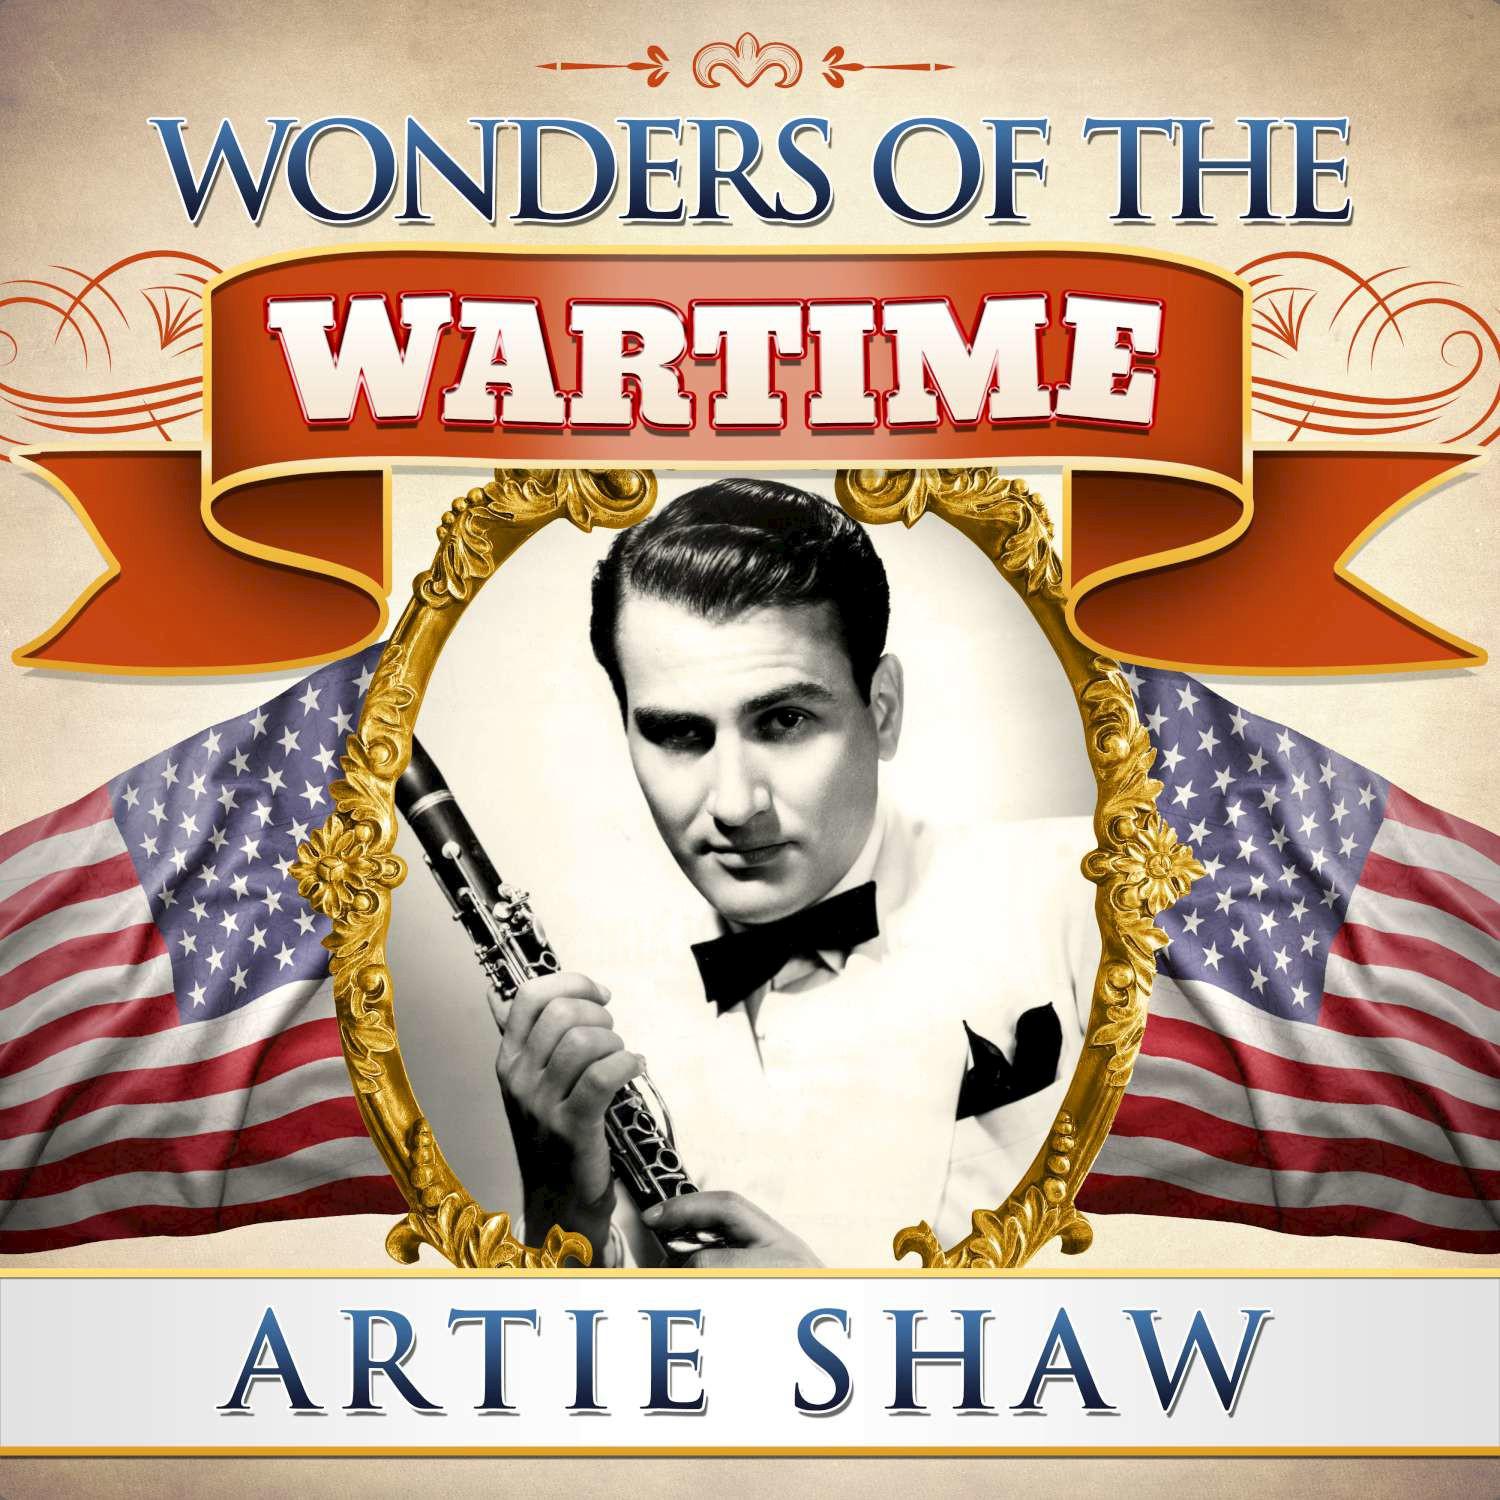 Wonders of the Wartime: Artie Shaw